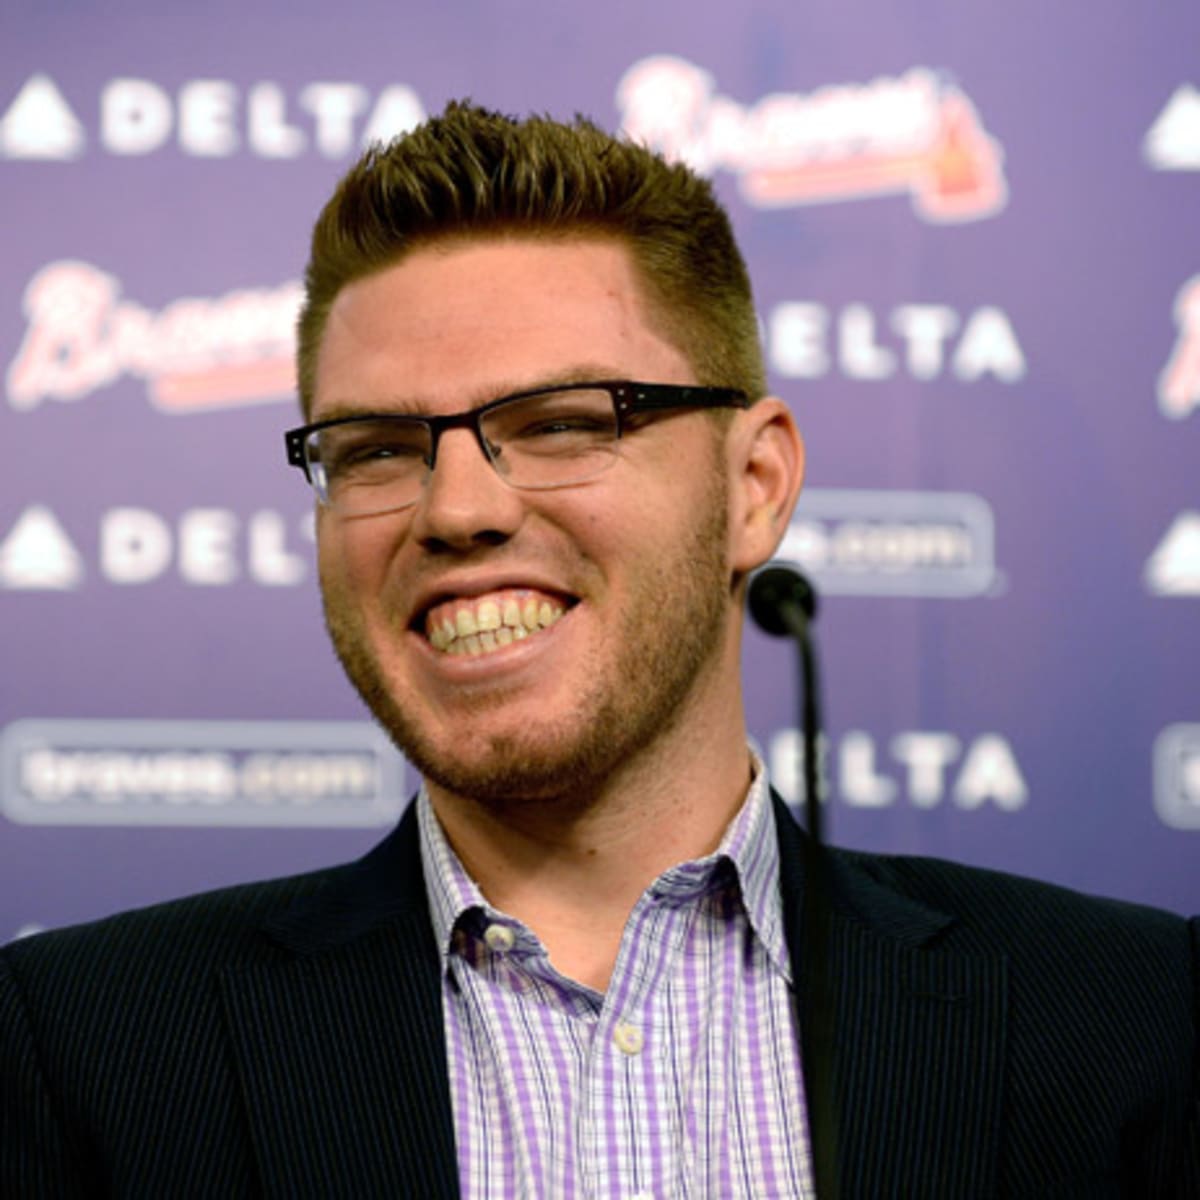 Freddie Freeman humbled by record Braves contract - Sports Illustrated